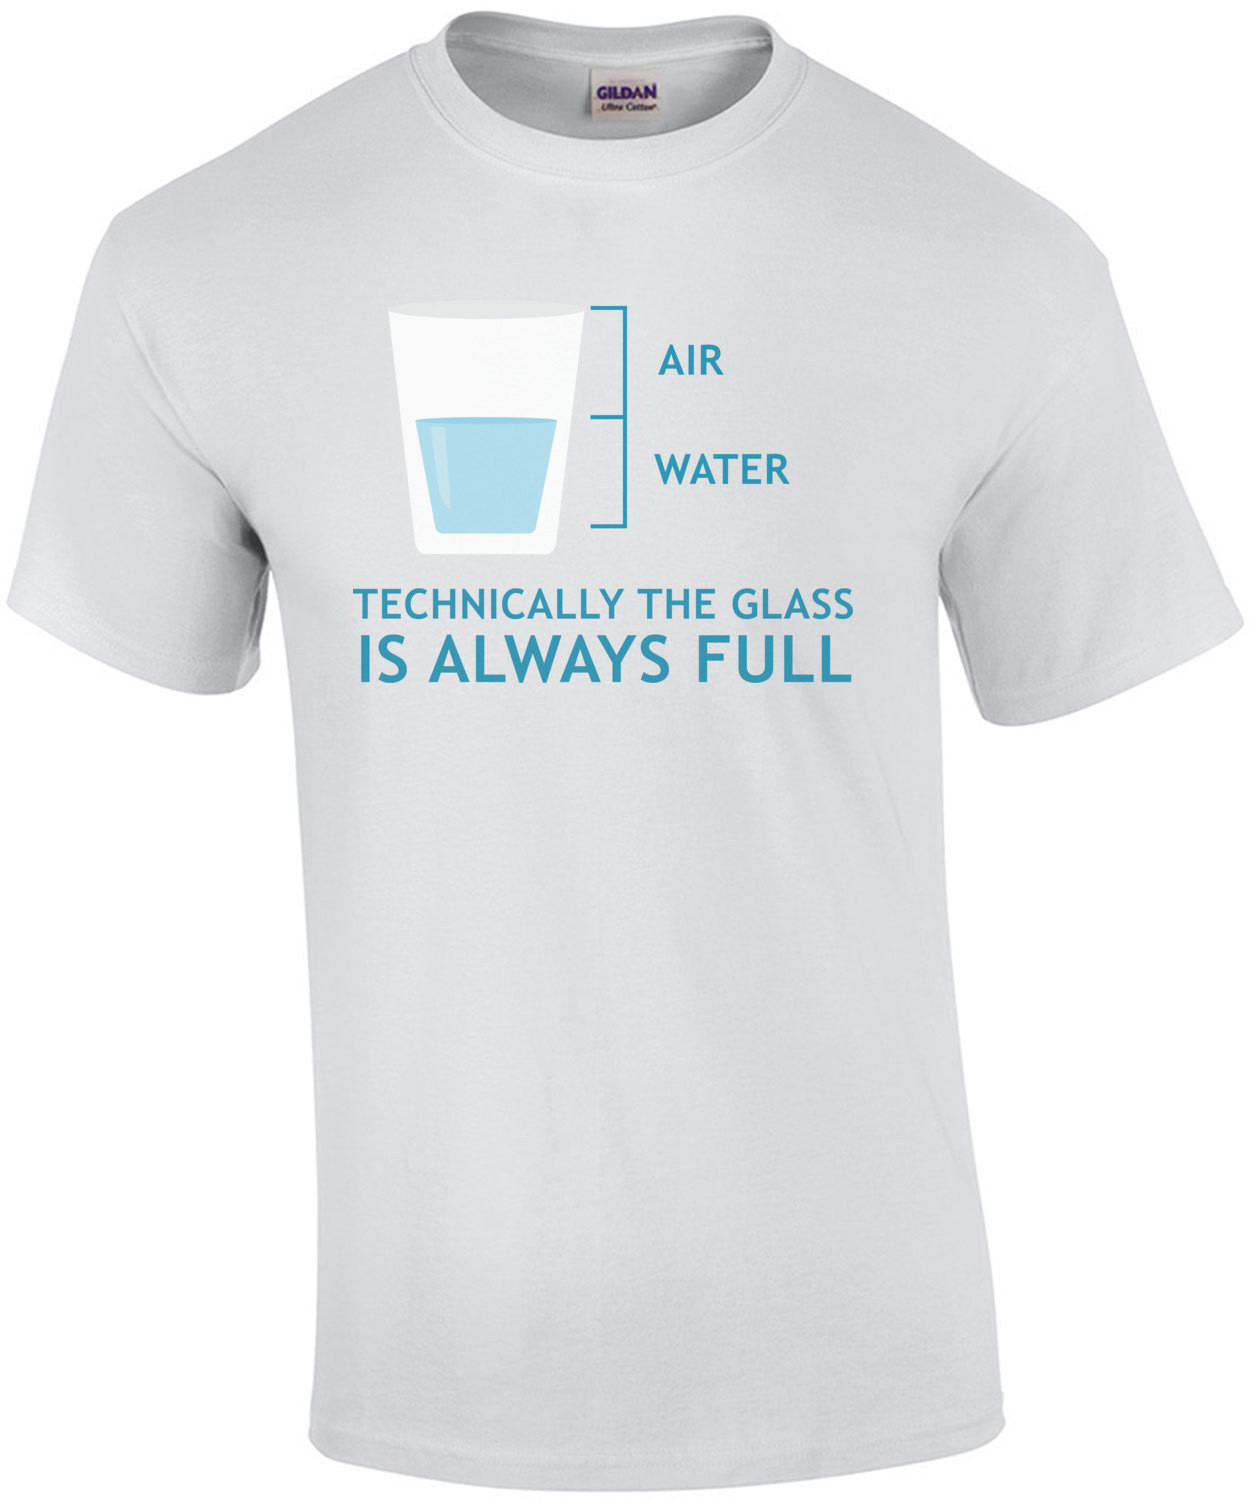 Technically the glass is always full - funny